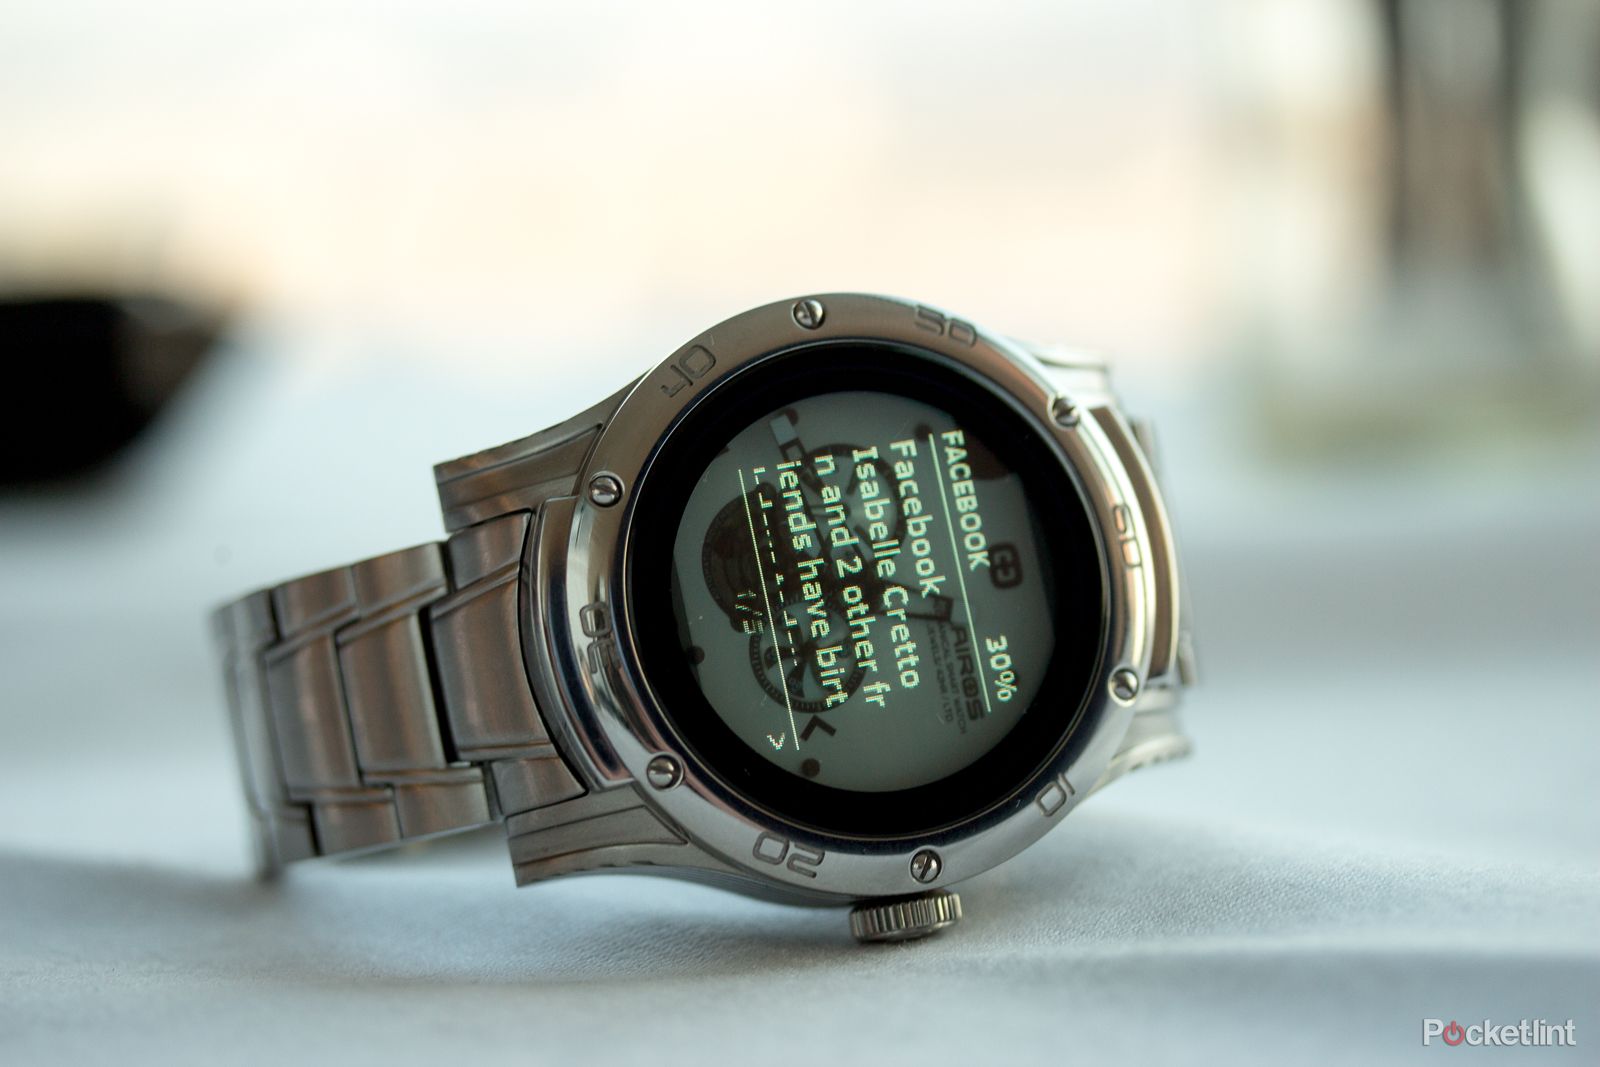 kairos see through smartwatch lets you have your cake and eat it image 1